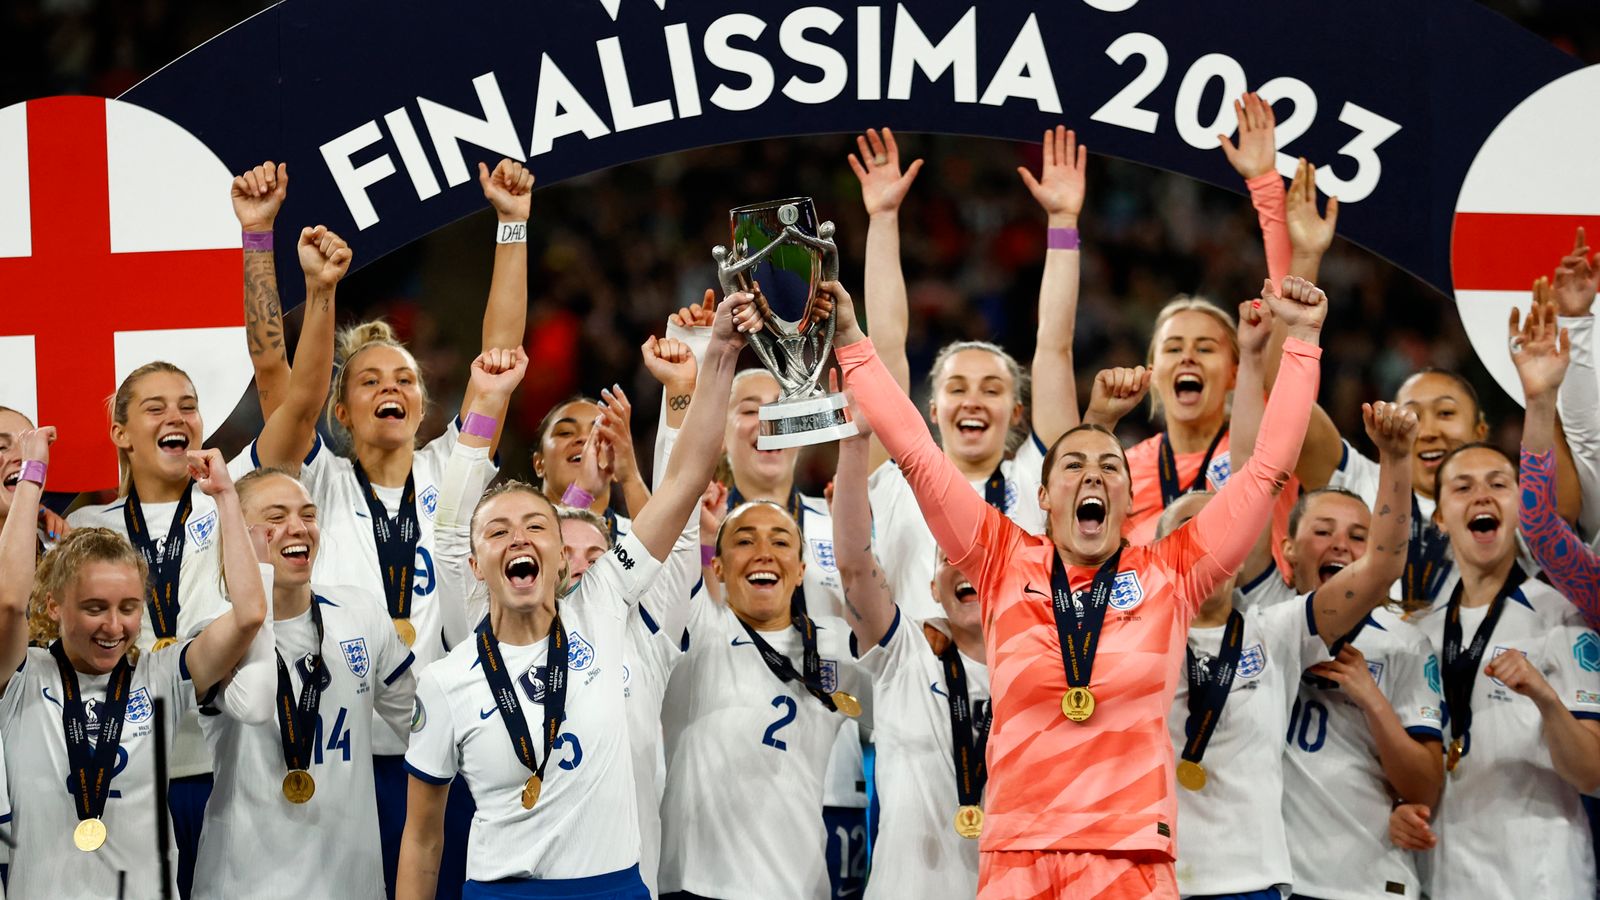 England's Lionesses beat Brazil in first-ever Women's Finalissima after penalty shootout